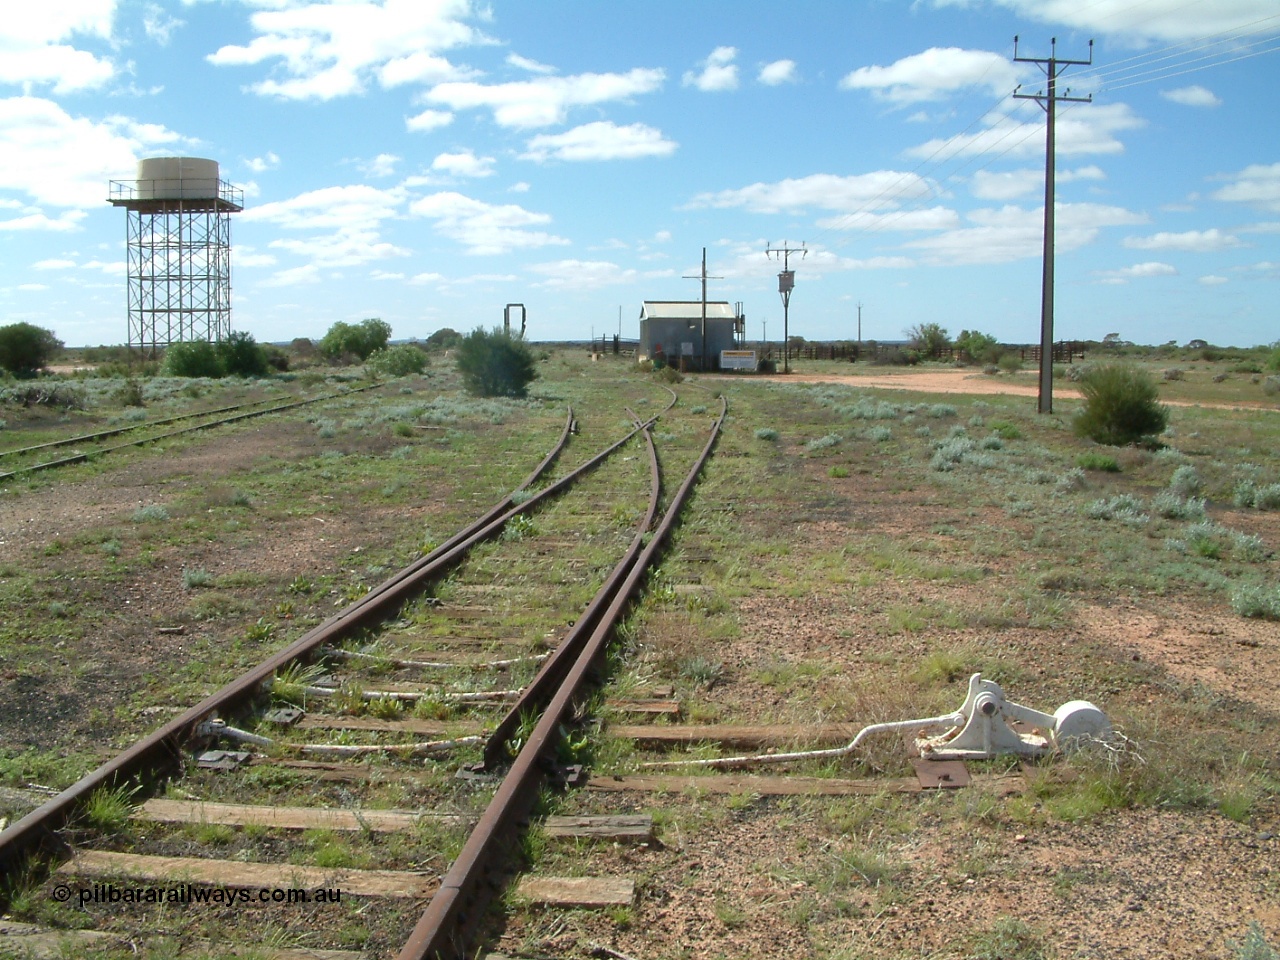 030415 140953
Kingoonya, located at the 426.5 km on the Trans Australian Railway, looking north at the sidings, power station with cattle yards on the right. [url=https://goo.gl/maps/vha6CQXxnGPdXtKn6]GeoData location[/url].
